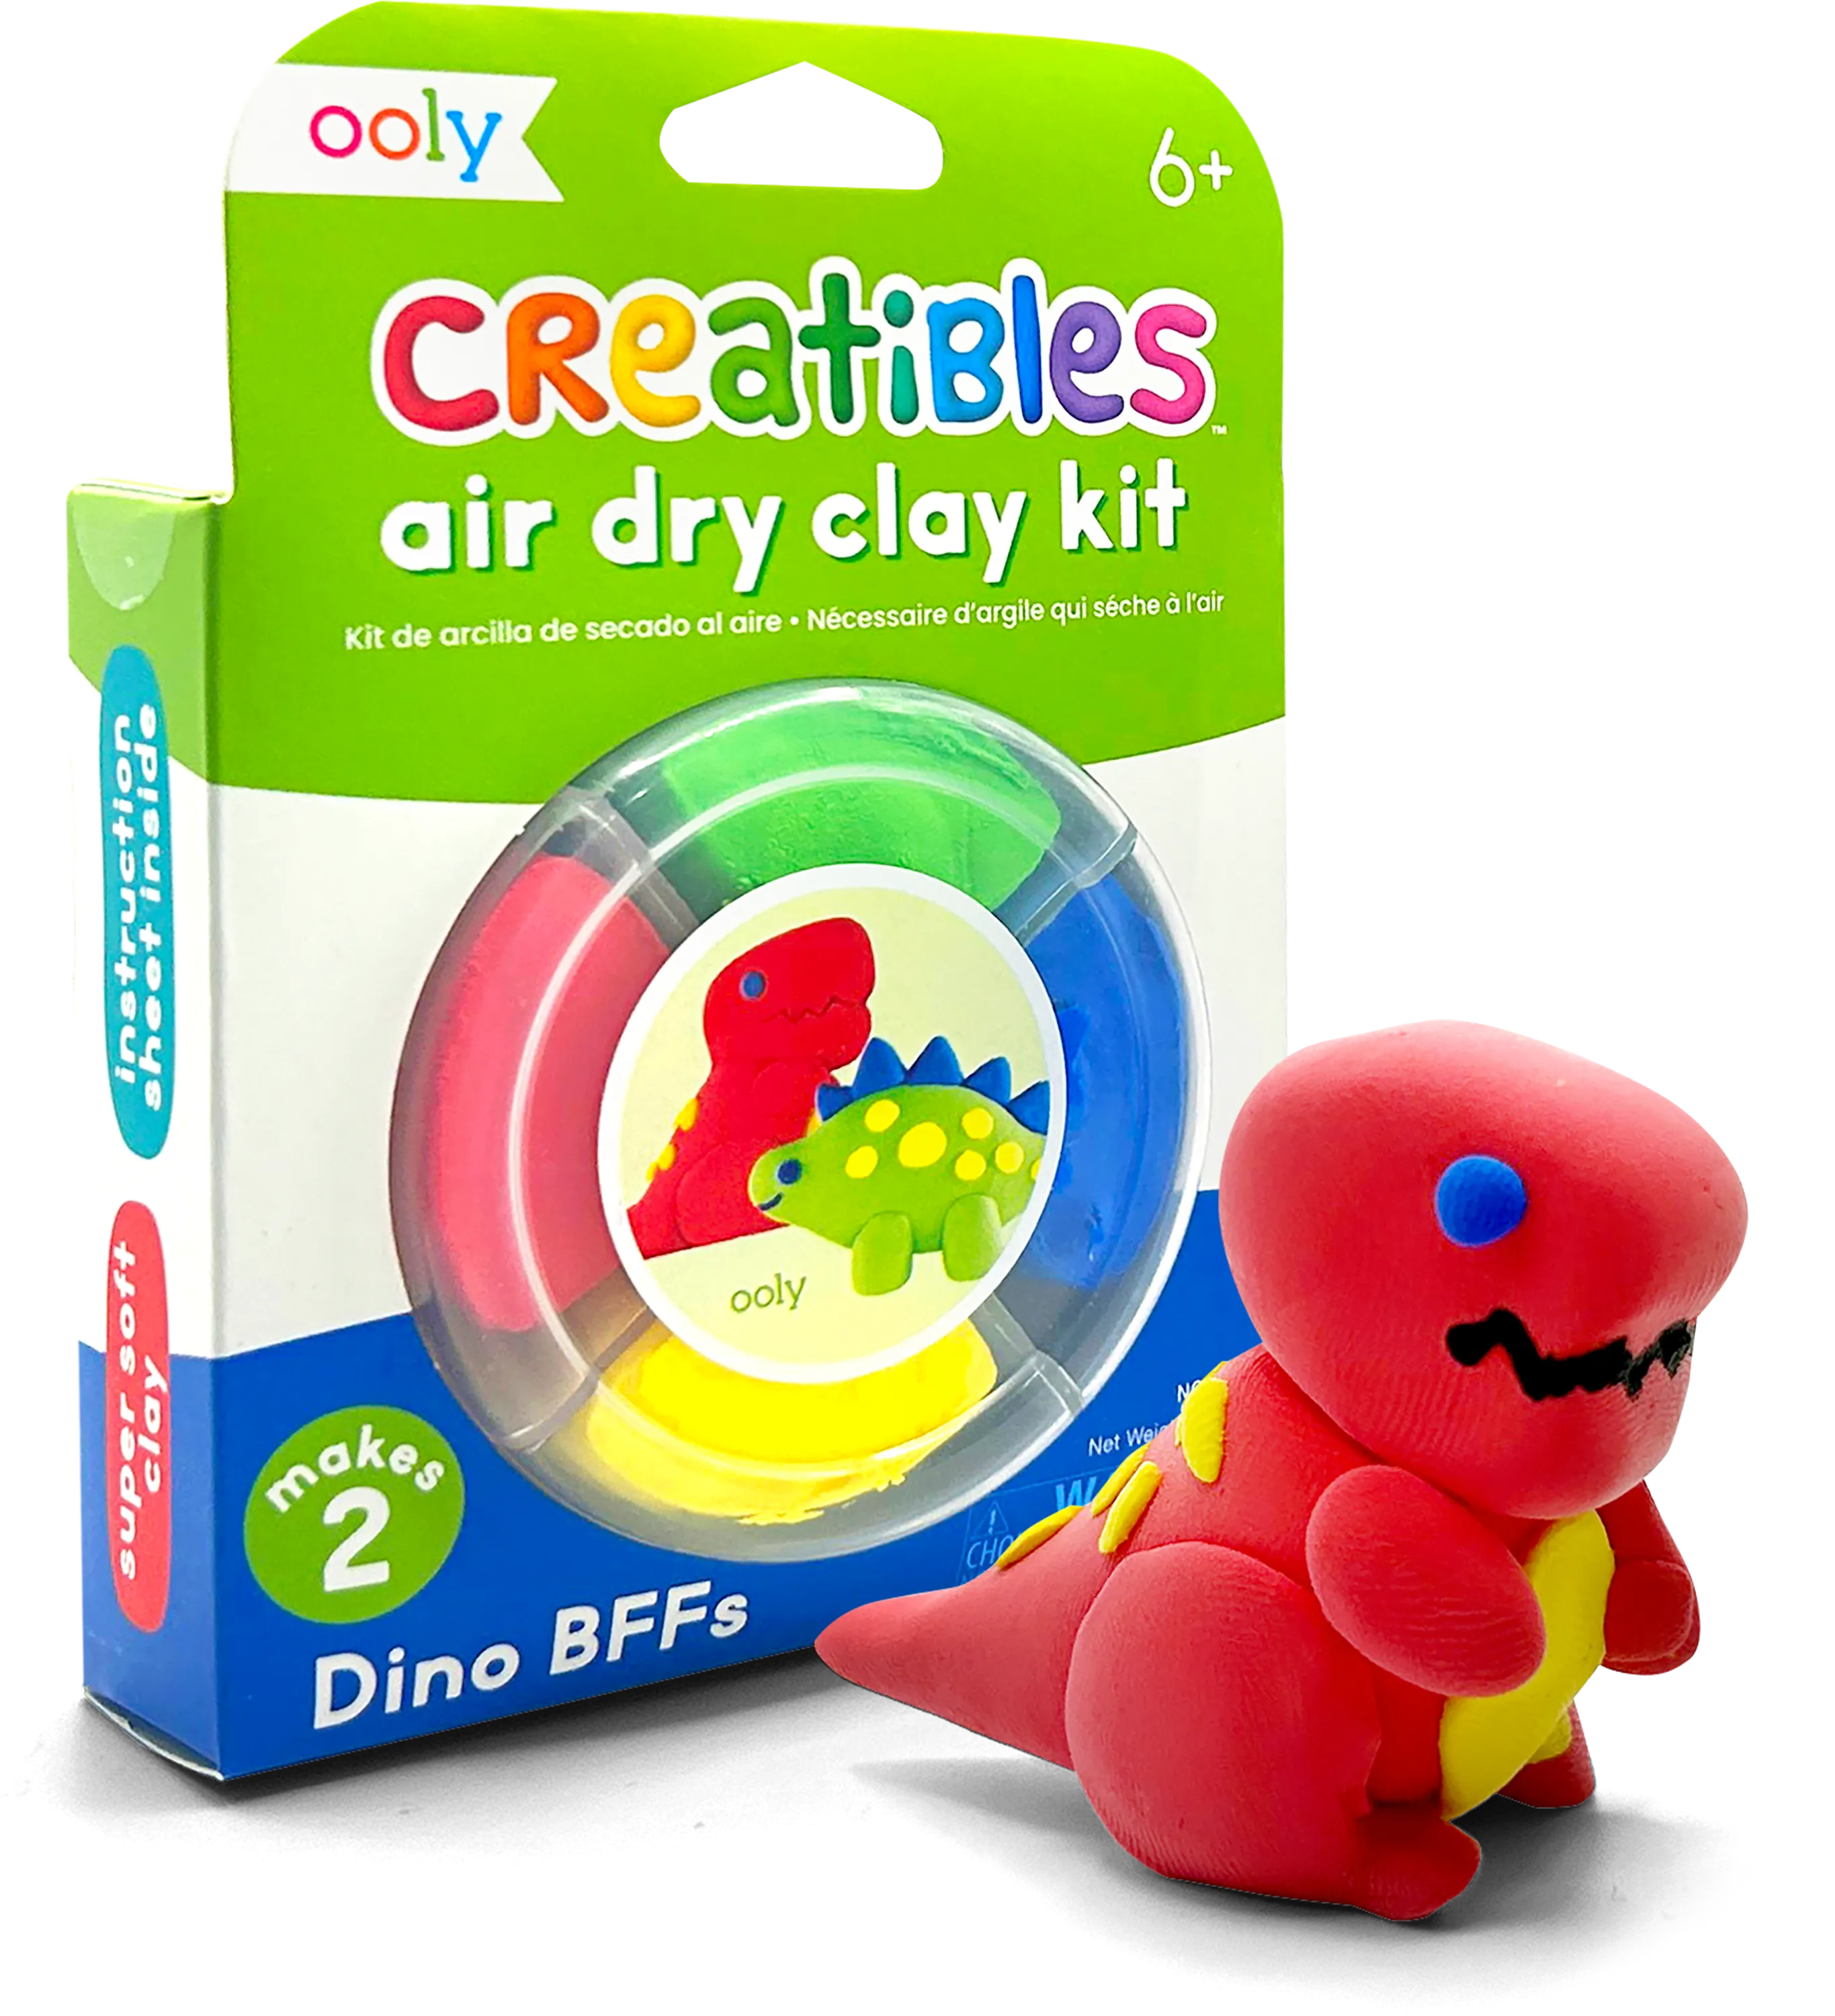 Quarter angle of packaging of OOLY Creatibles Mini Air Dry Clay Kit - Dino BFFs